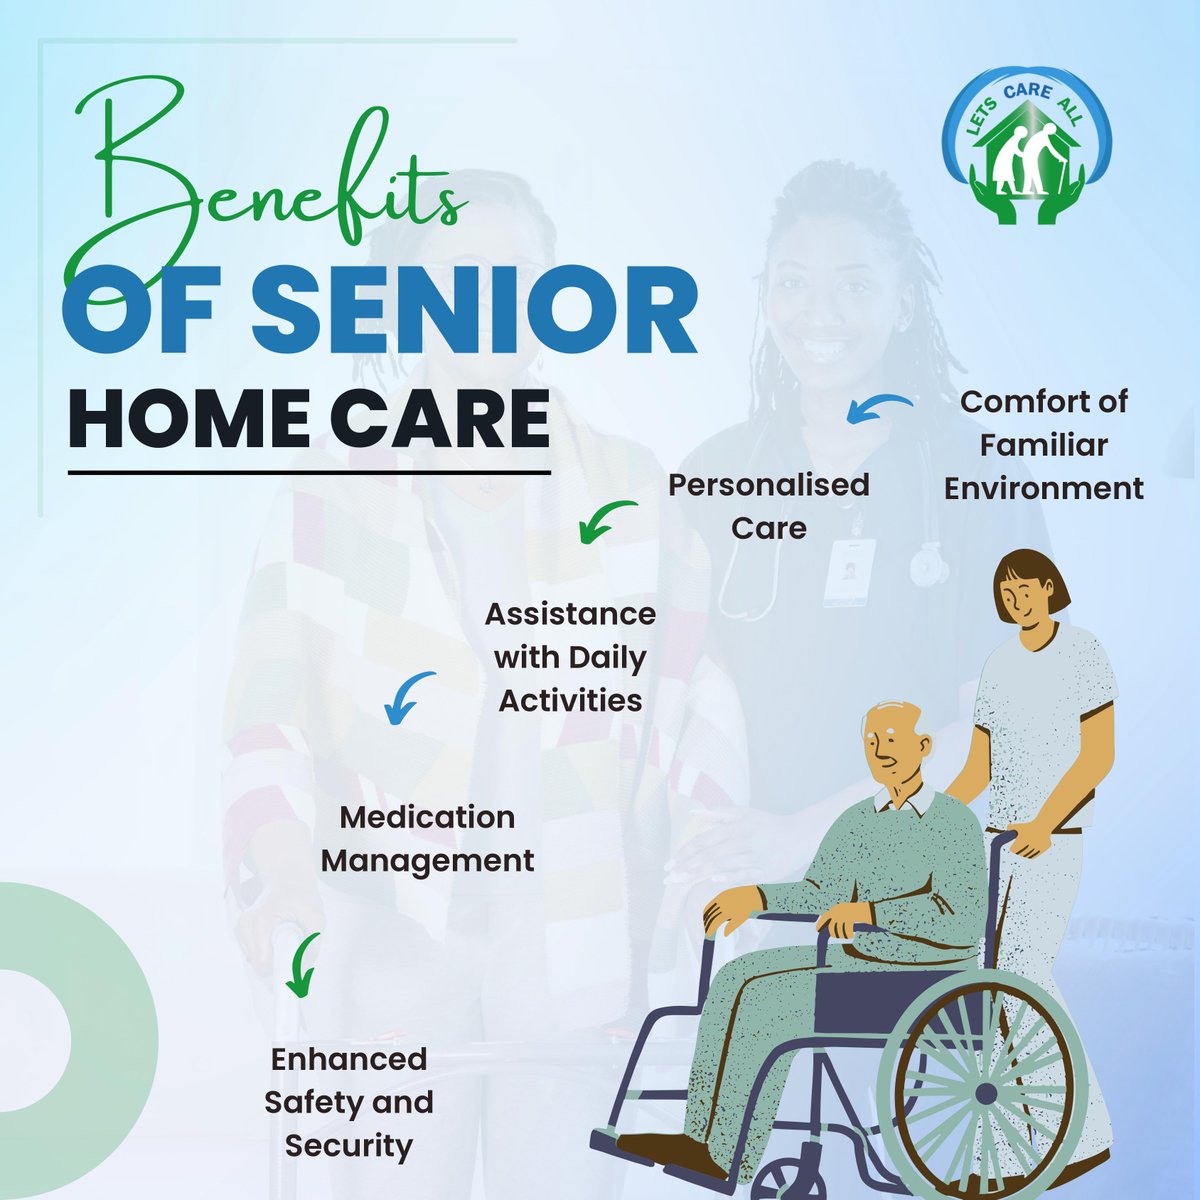 Experience peace of mind for your loved ones with our senior home care services. Let us provide your elderly loved ones with the best care possible. #SeniorHomeCare #ElderCareServices #aginginplace #PersonalisedCare #SeniorCare #caregivingsupport #bestcaregivers #HomeCareSupport